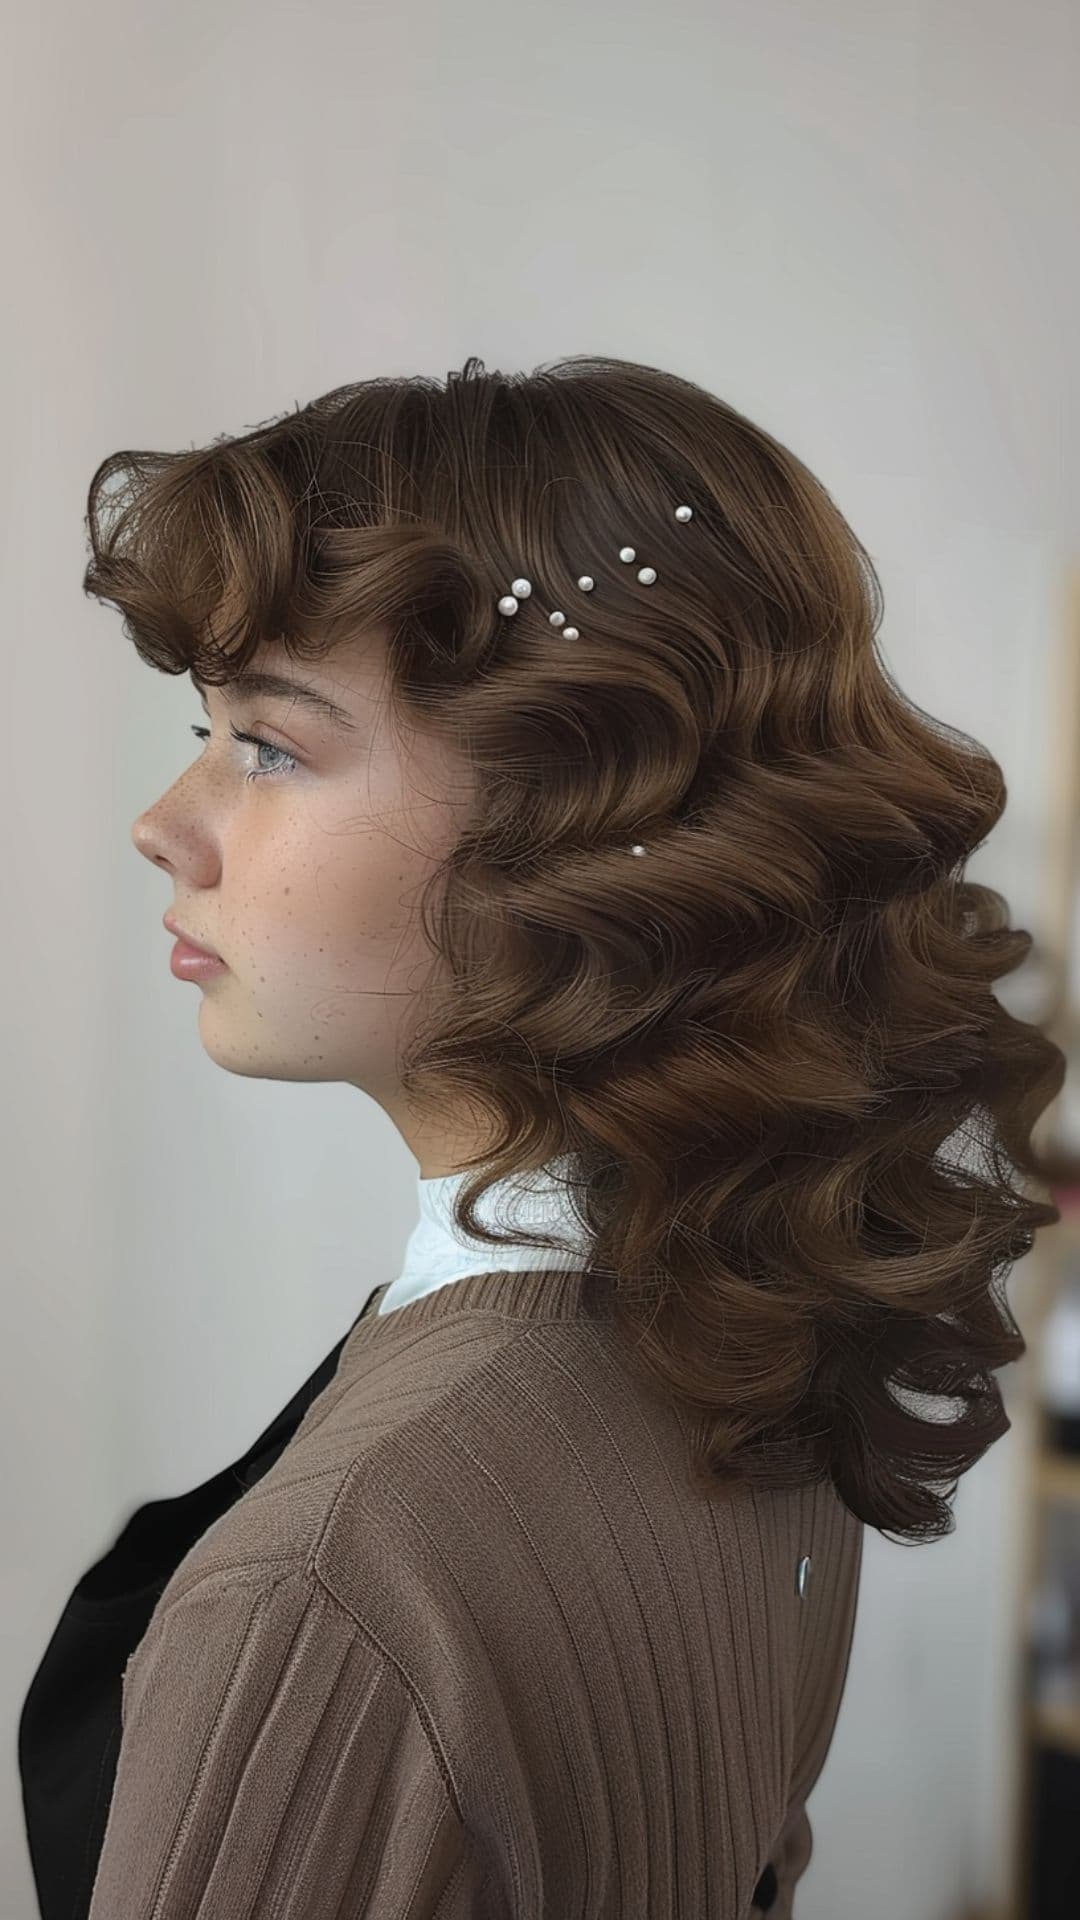 A round-faced woman modelling a retro waves hairstyle.